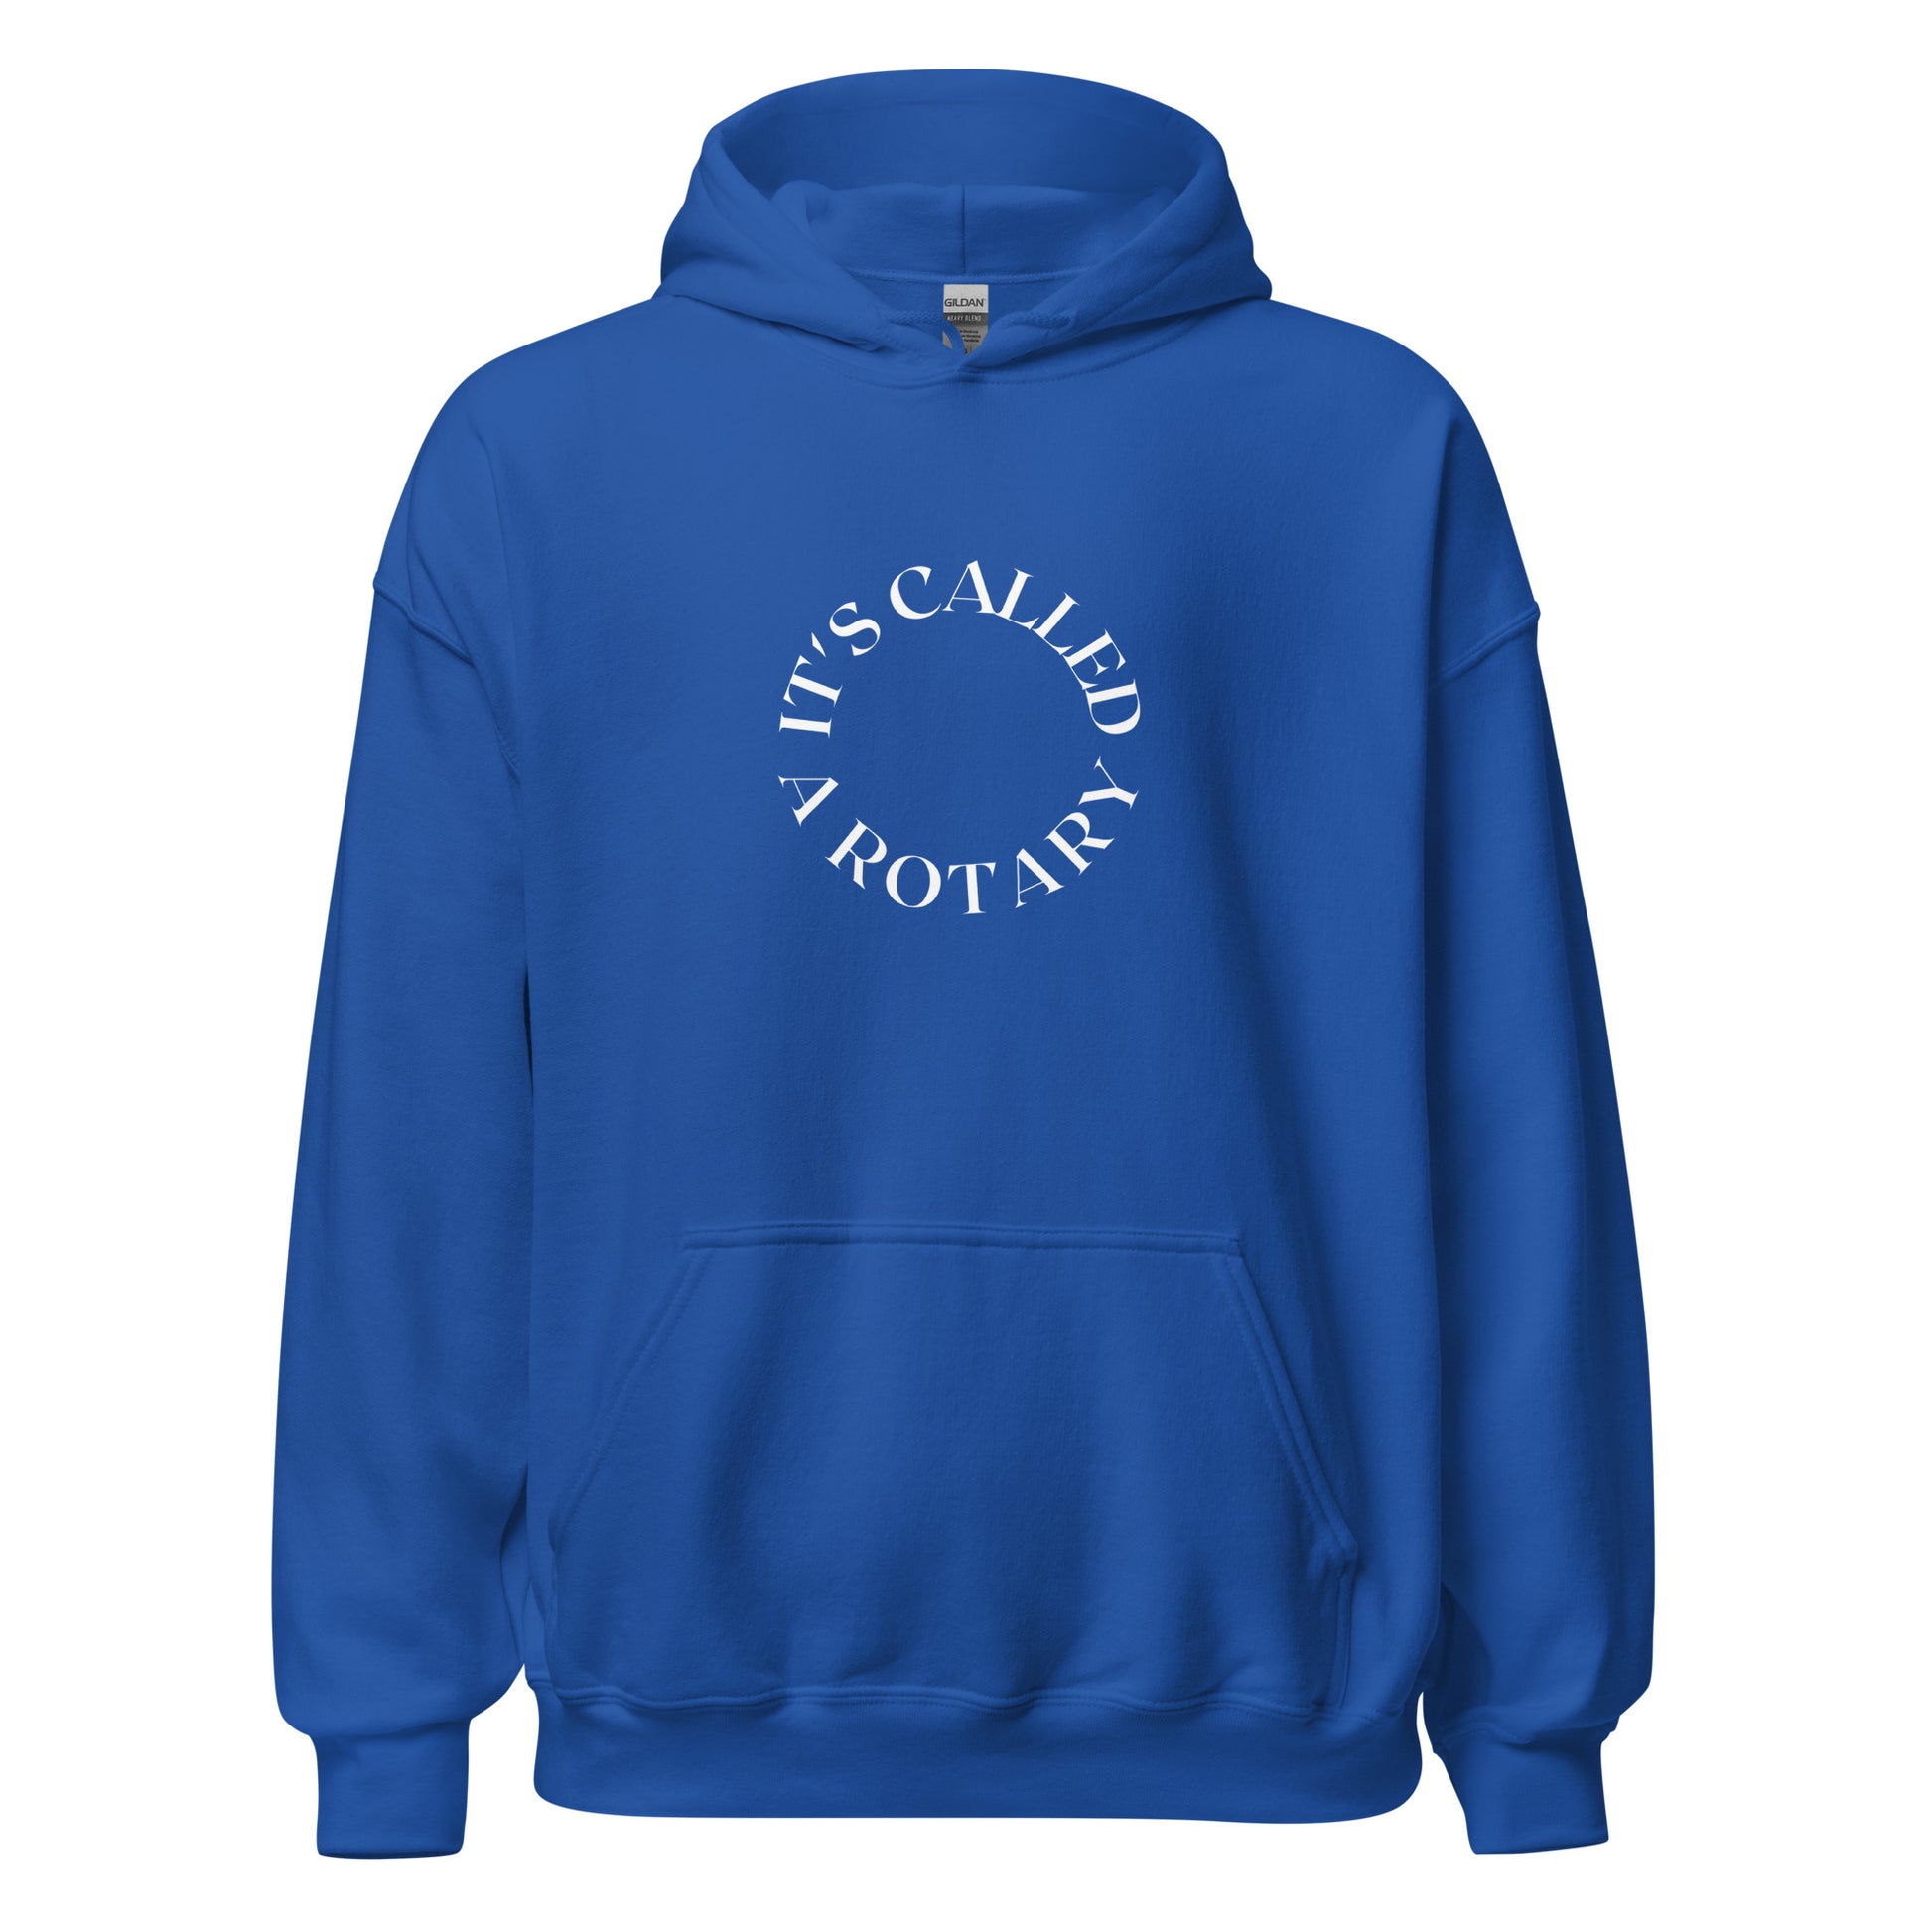 royal blue hoodie that saying "it's called a rotary" in white lettering shaped in a circle